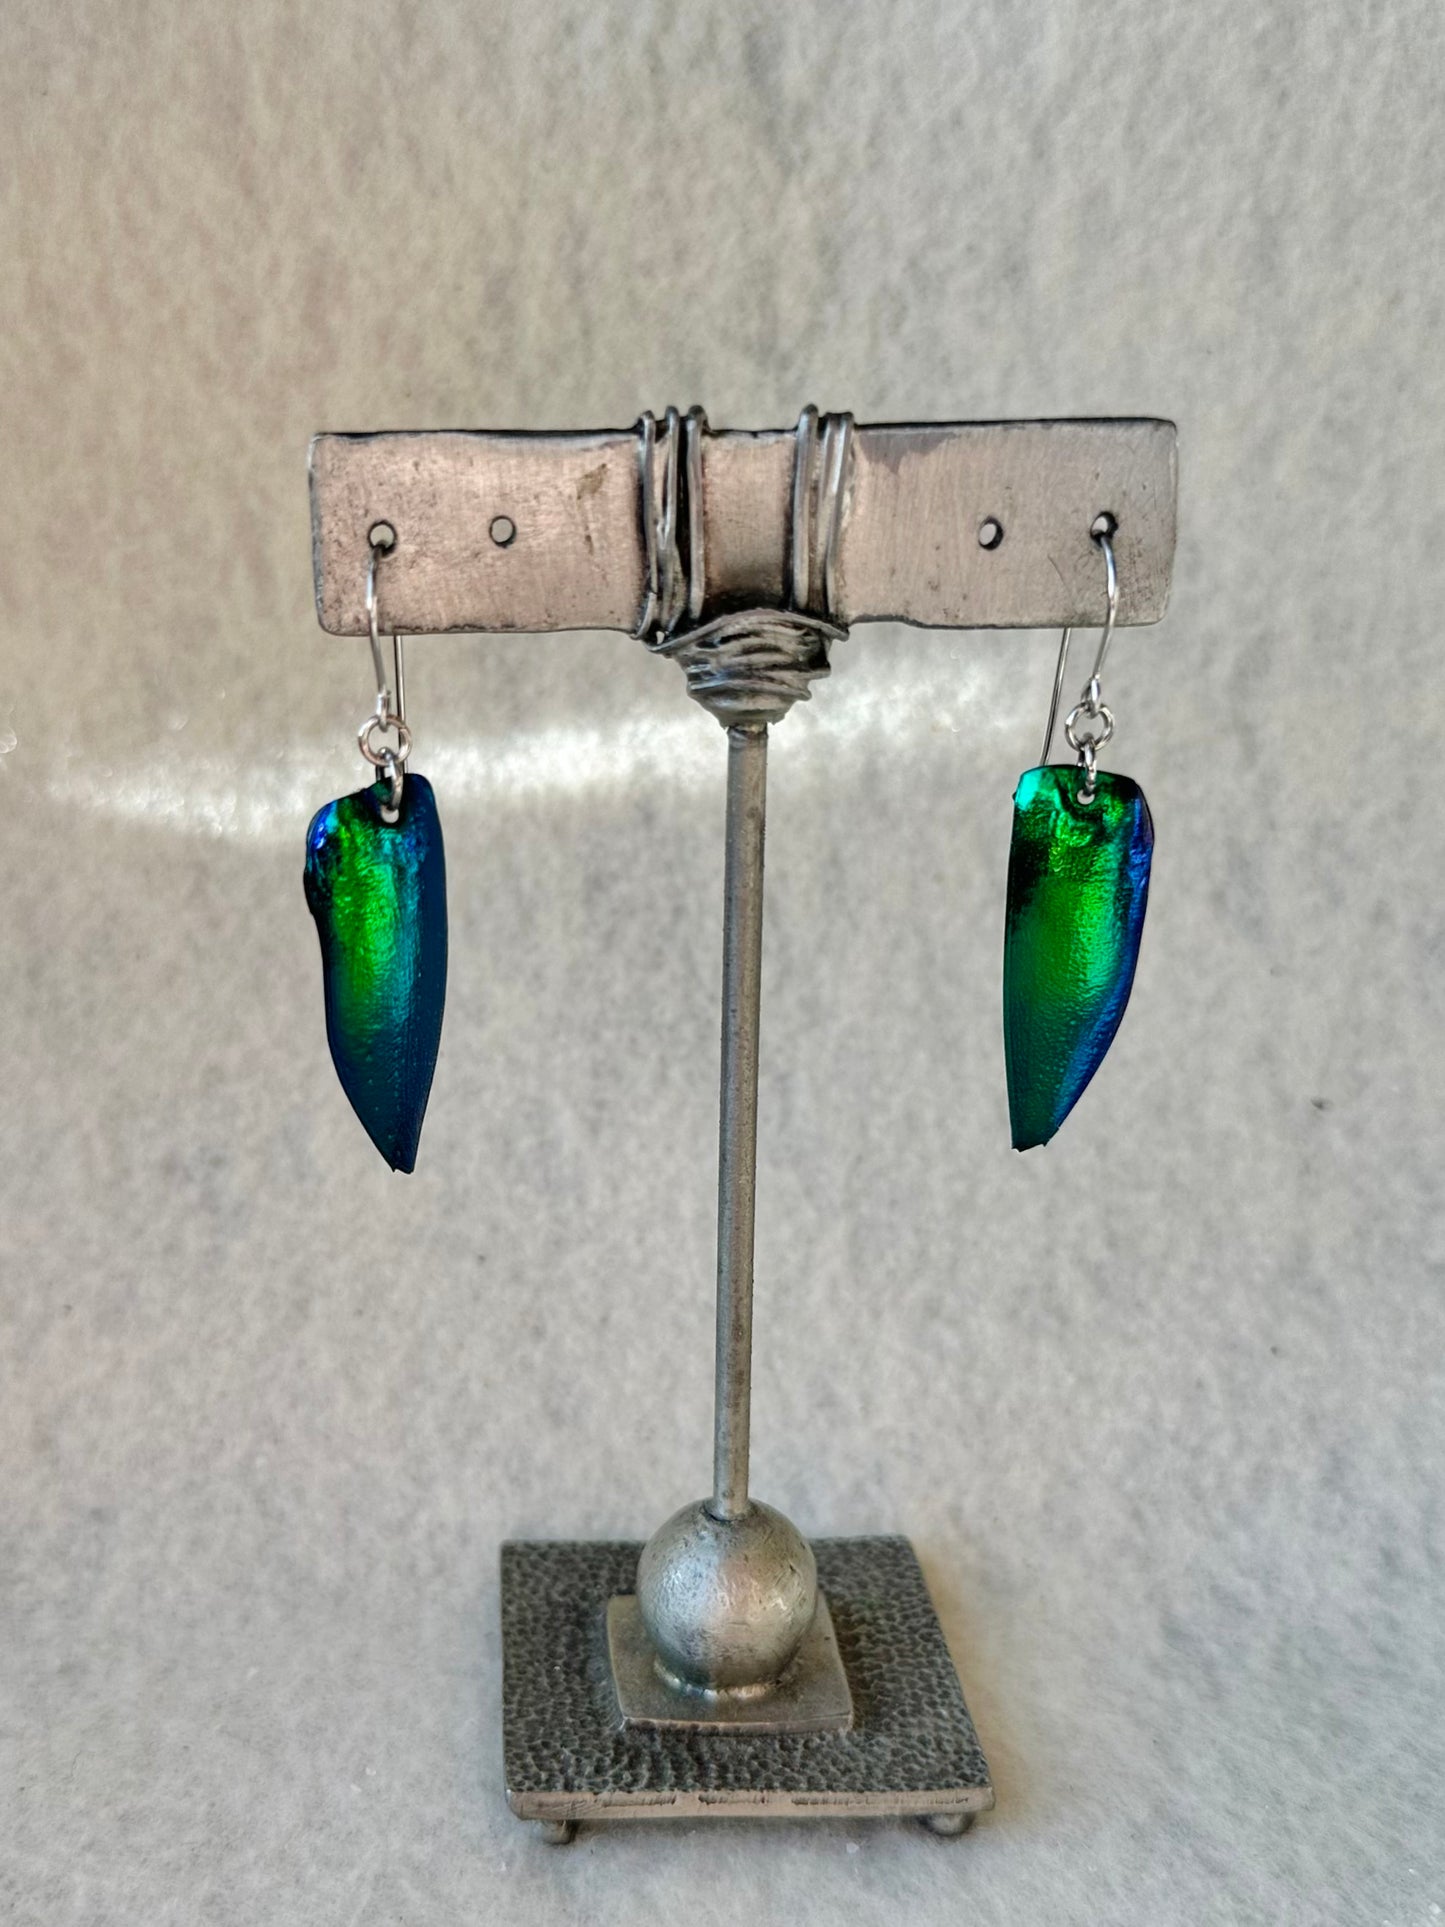 Single Earrings made from Elytra Beetles with Surgical Steel